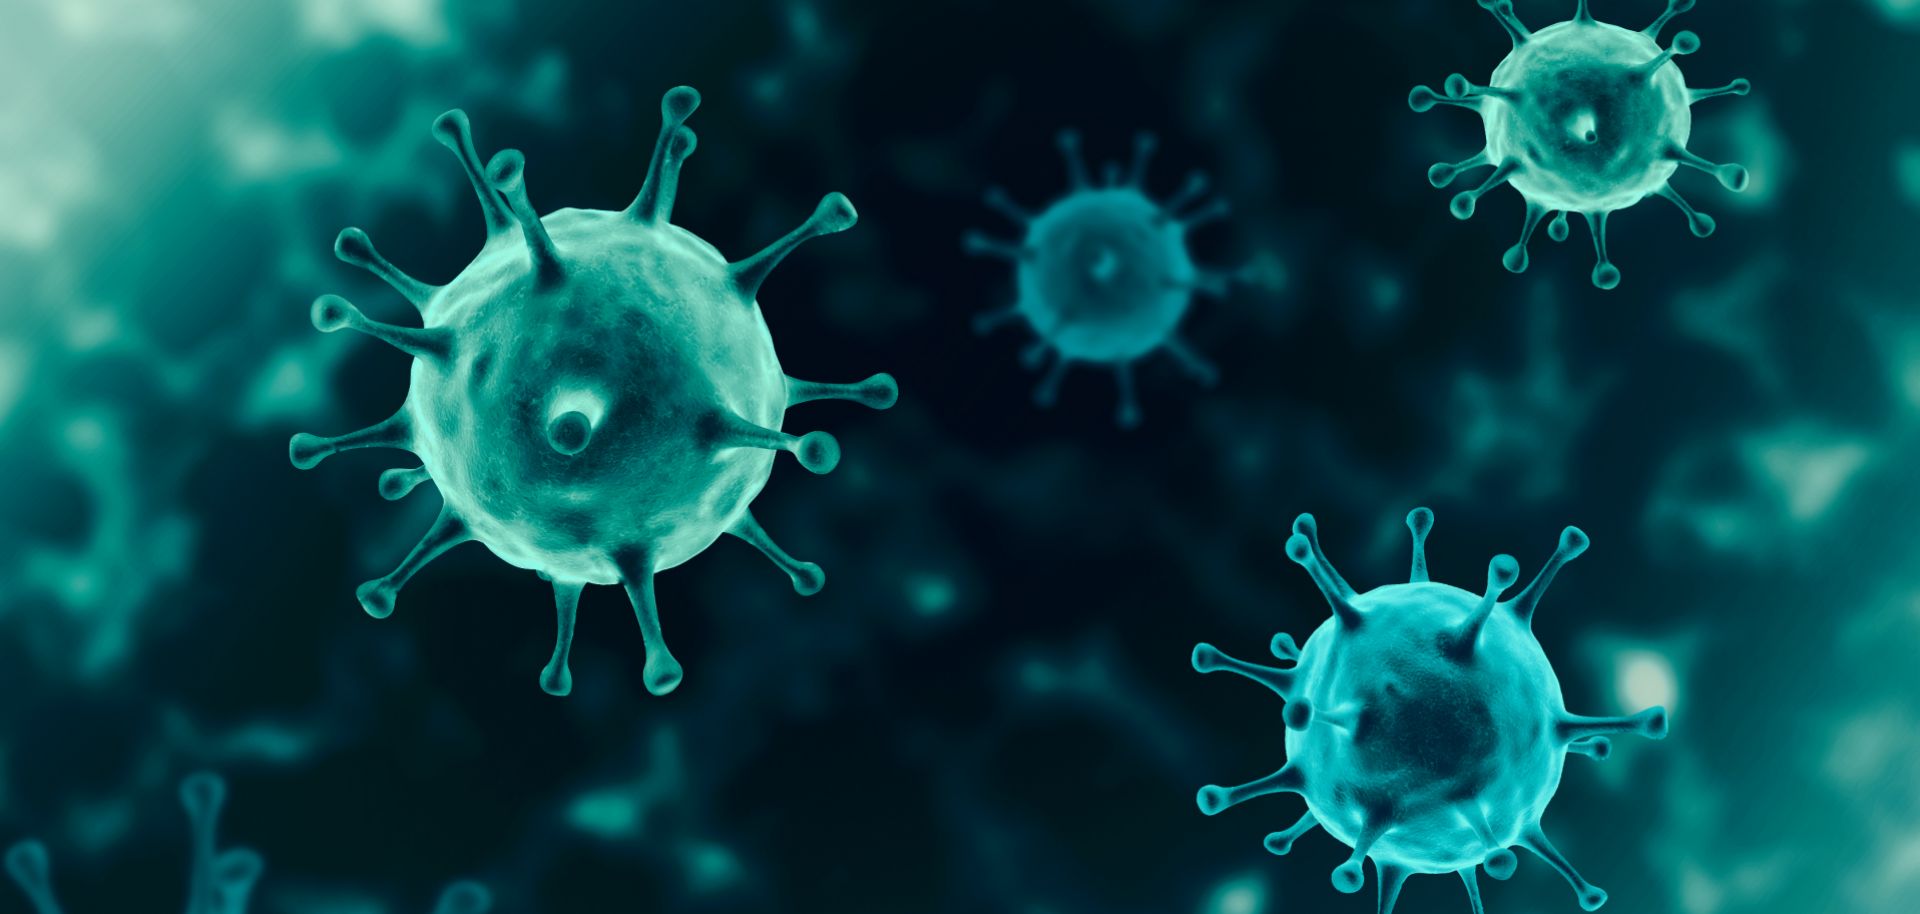 A 3D rendering of the novel coronavirus floating in a cellular environment.